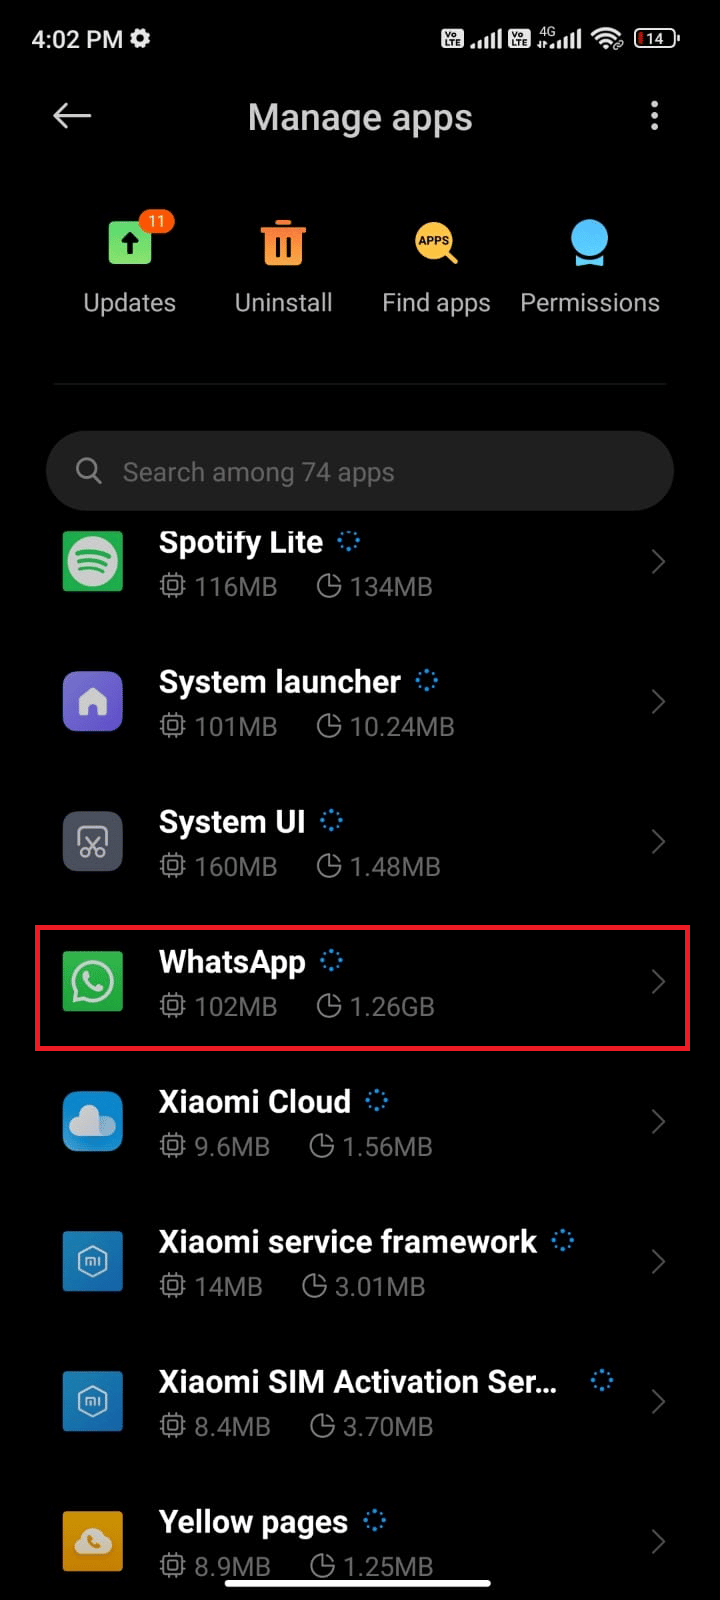 tap on Manage apps and then Whatsapp. Fix WhatsApp Keeps Crashing on Android